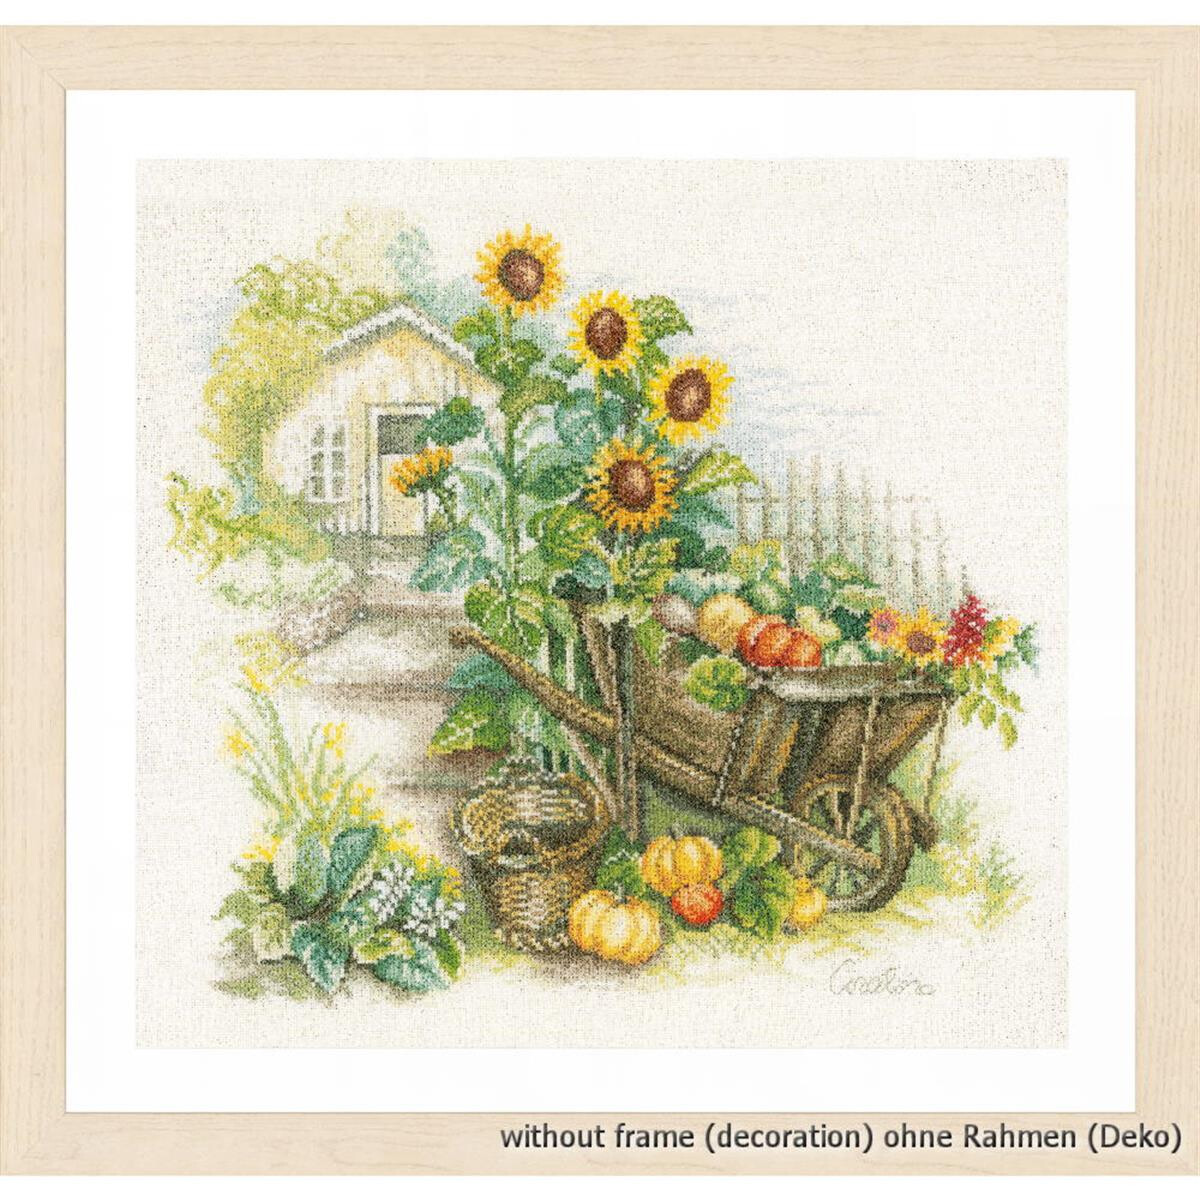 A detailed embroidery of a rustic garden scene shows a...